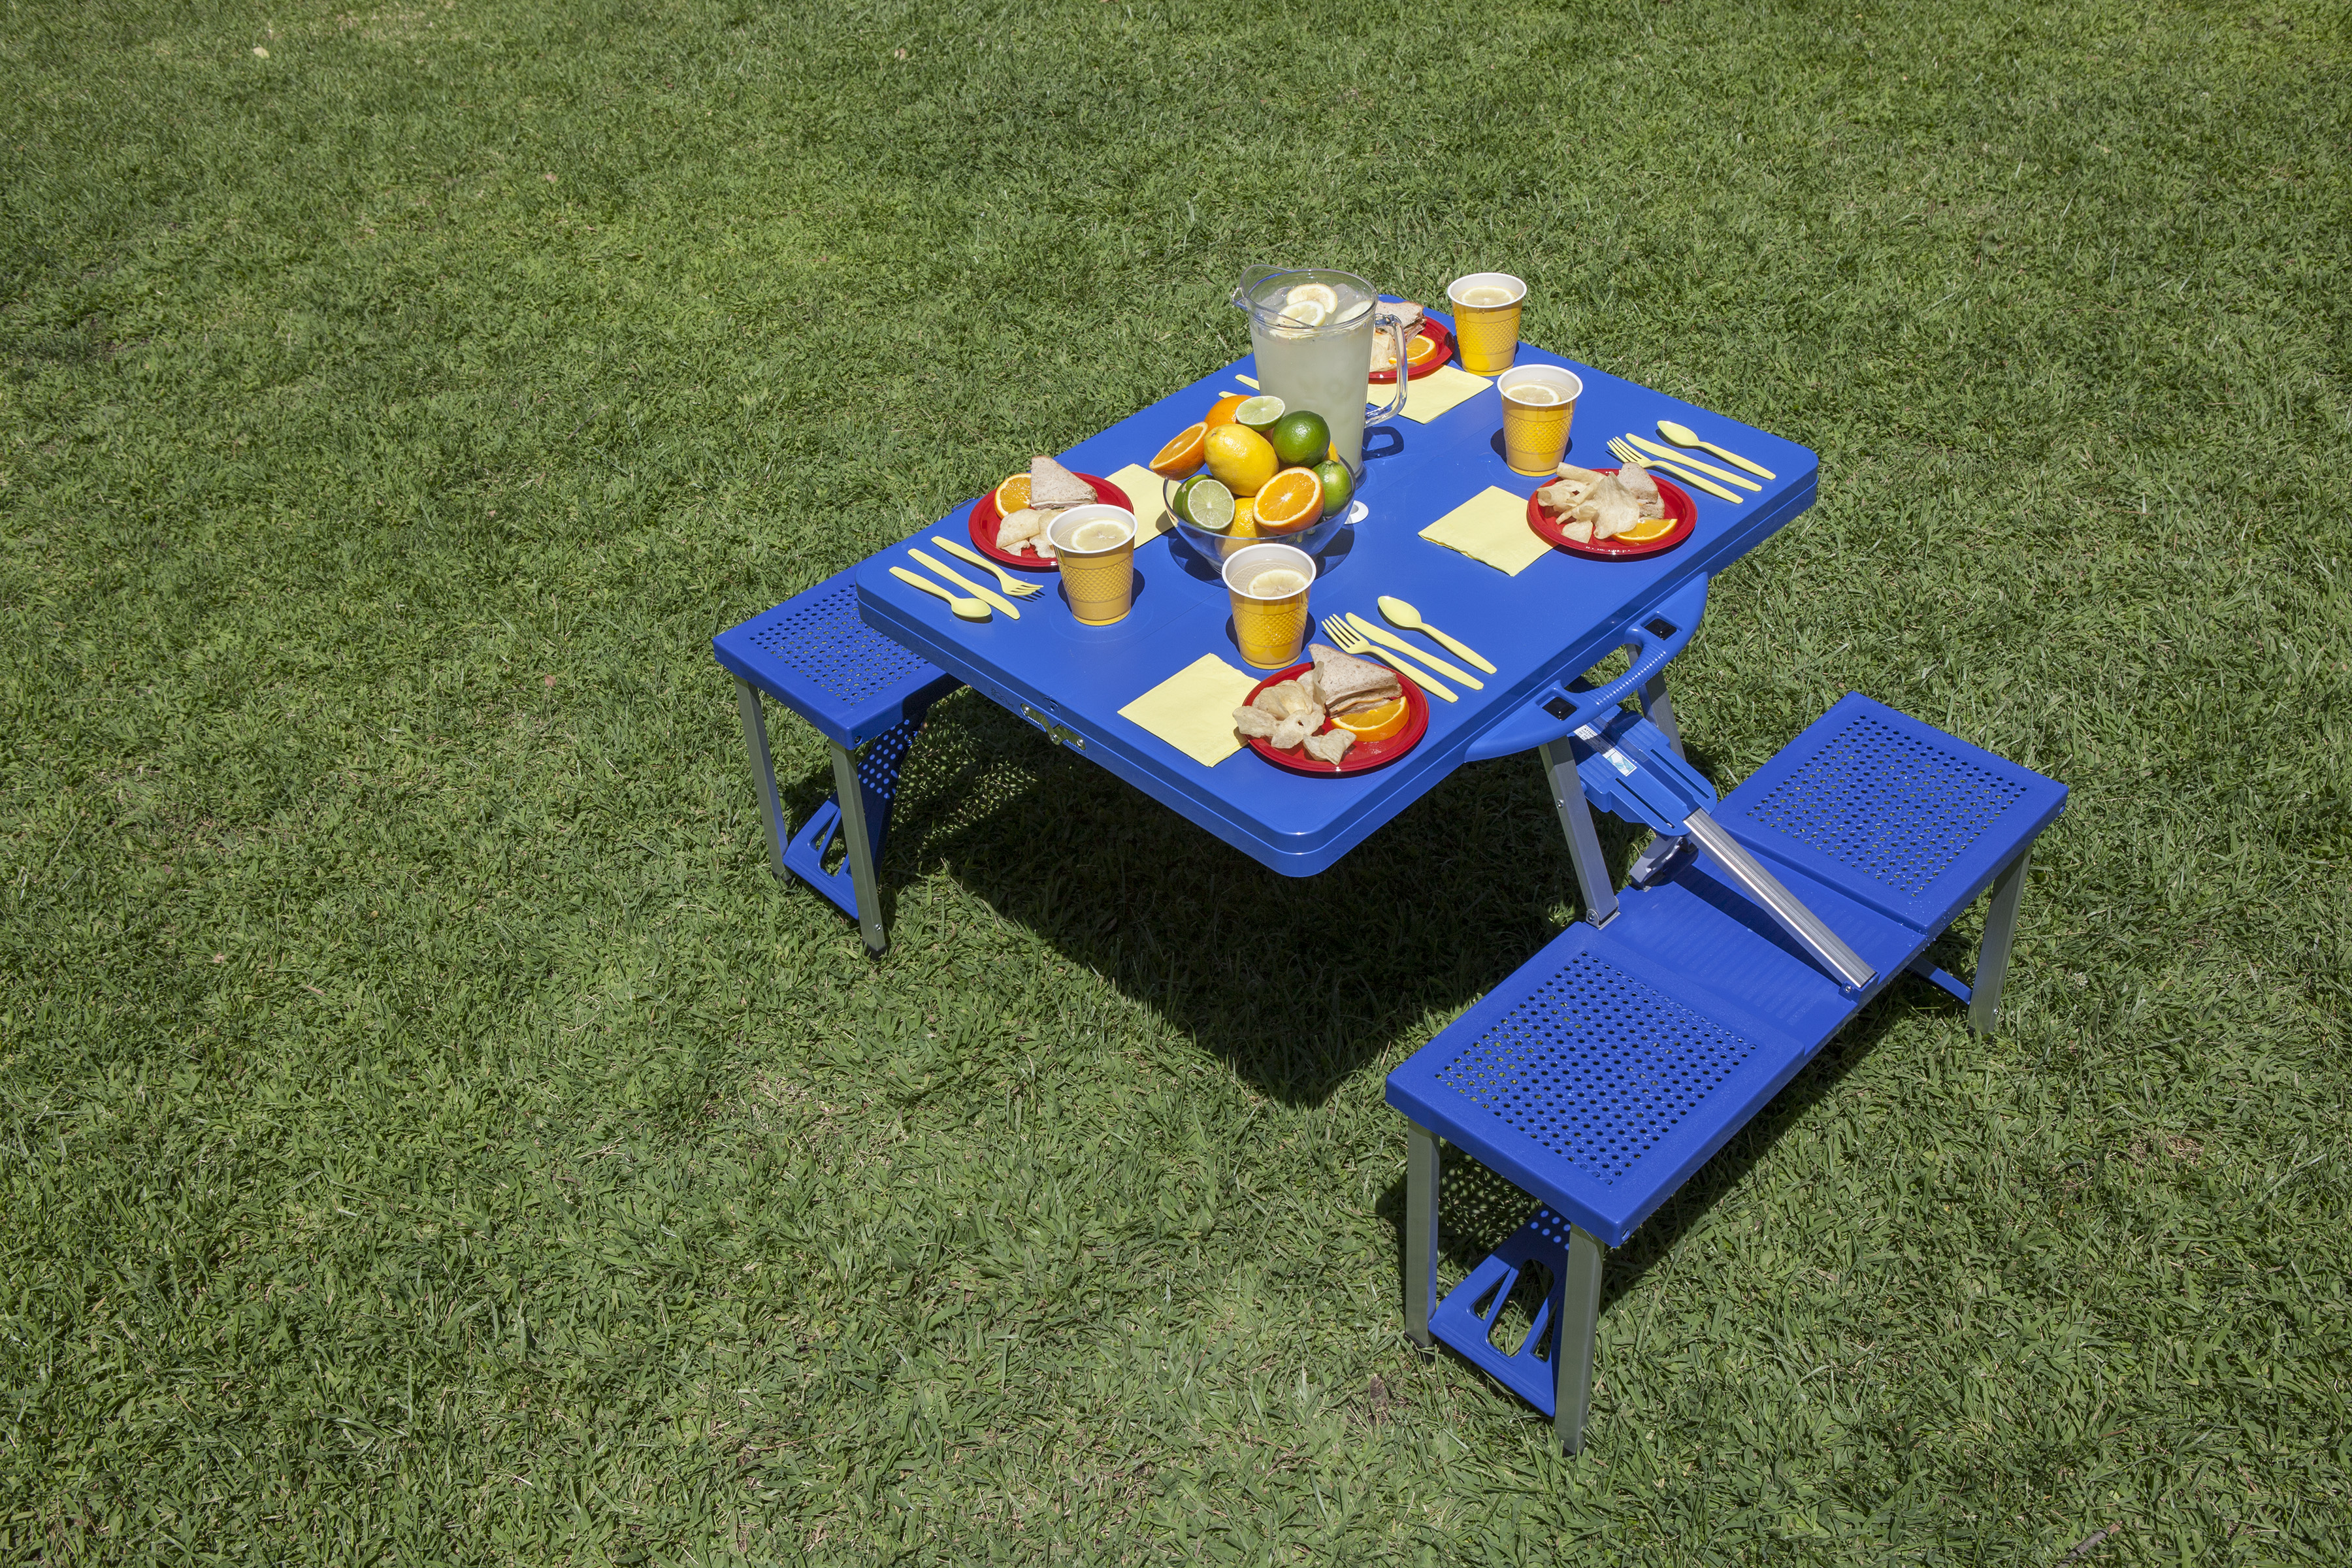 Hockey Rink - Vancouver Canucks - Picnic Table Portable Folding Table with Seats